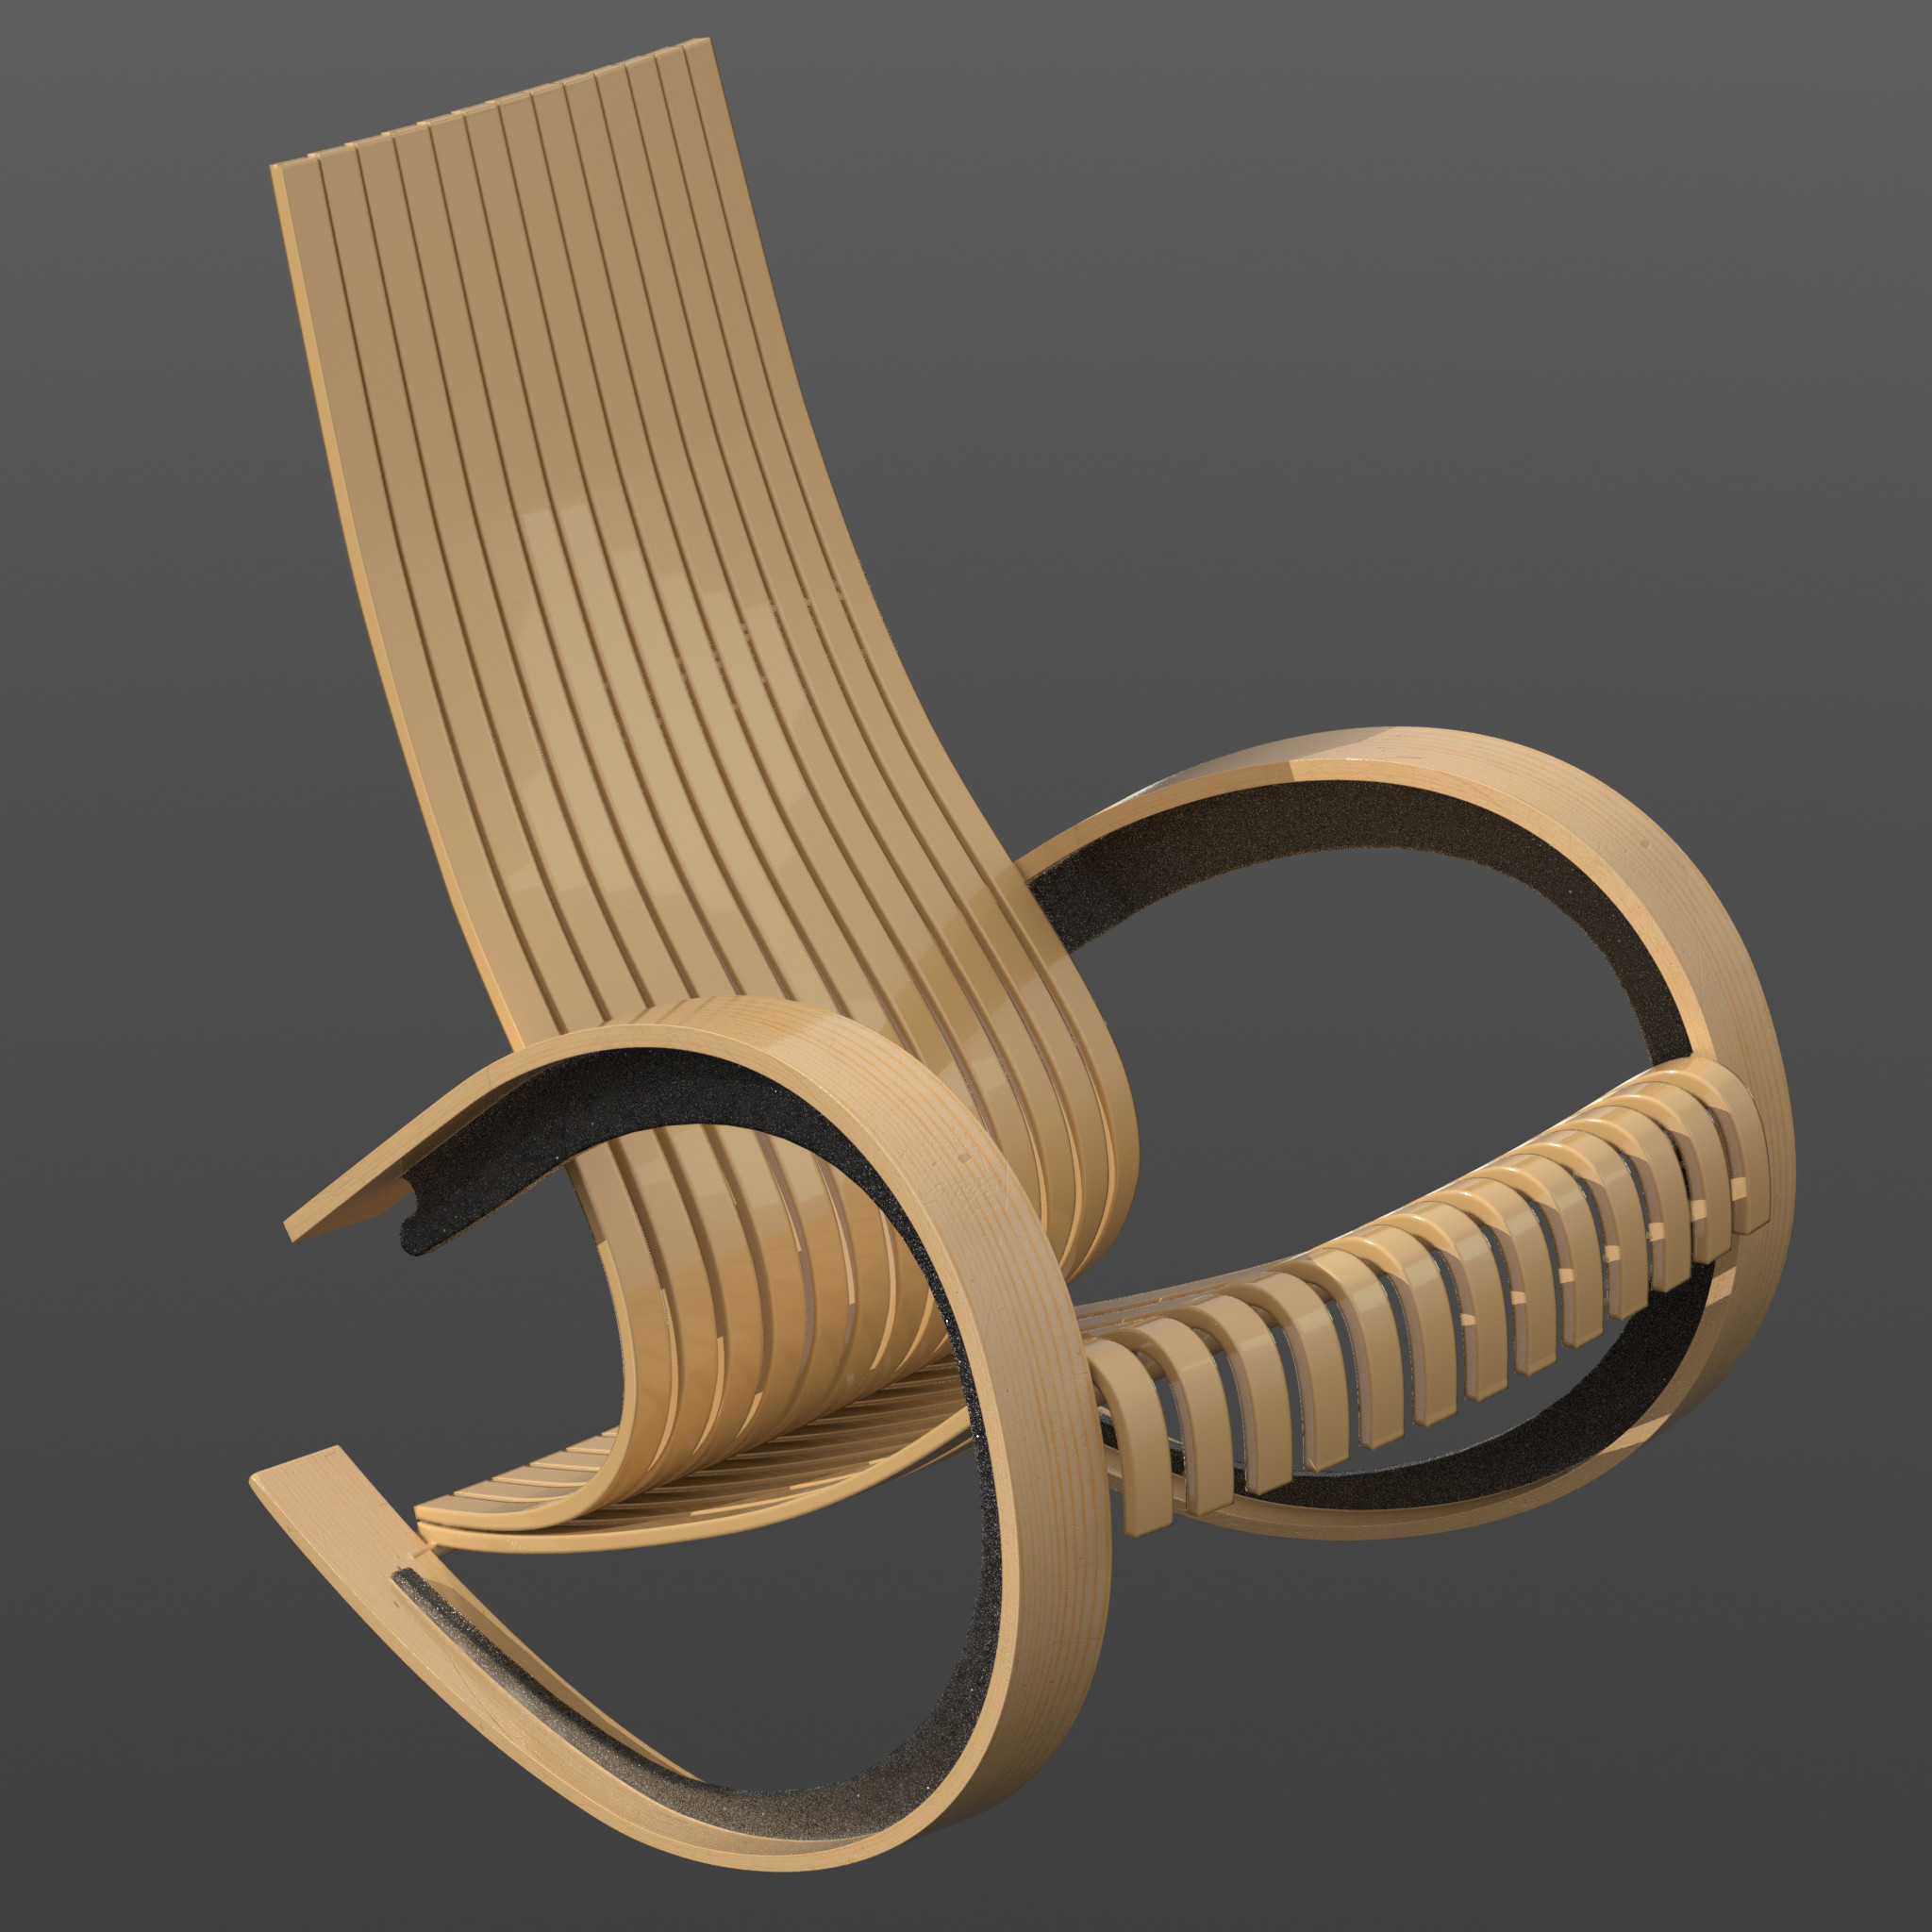 Quick modeling &amp; texture challenge - Cato-style rocker.